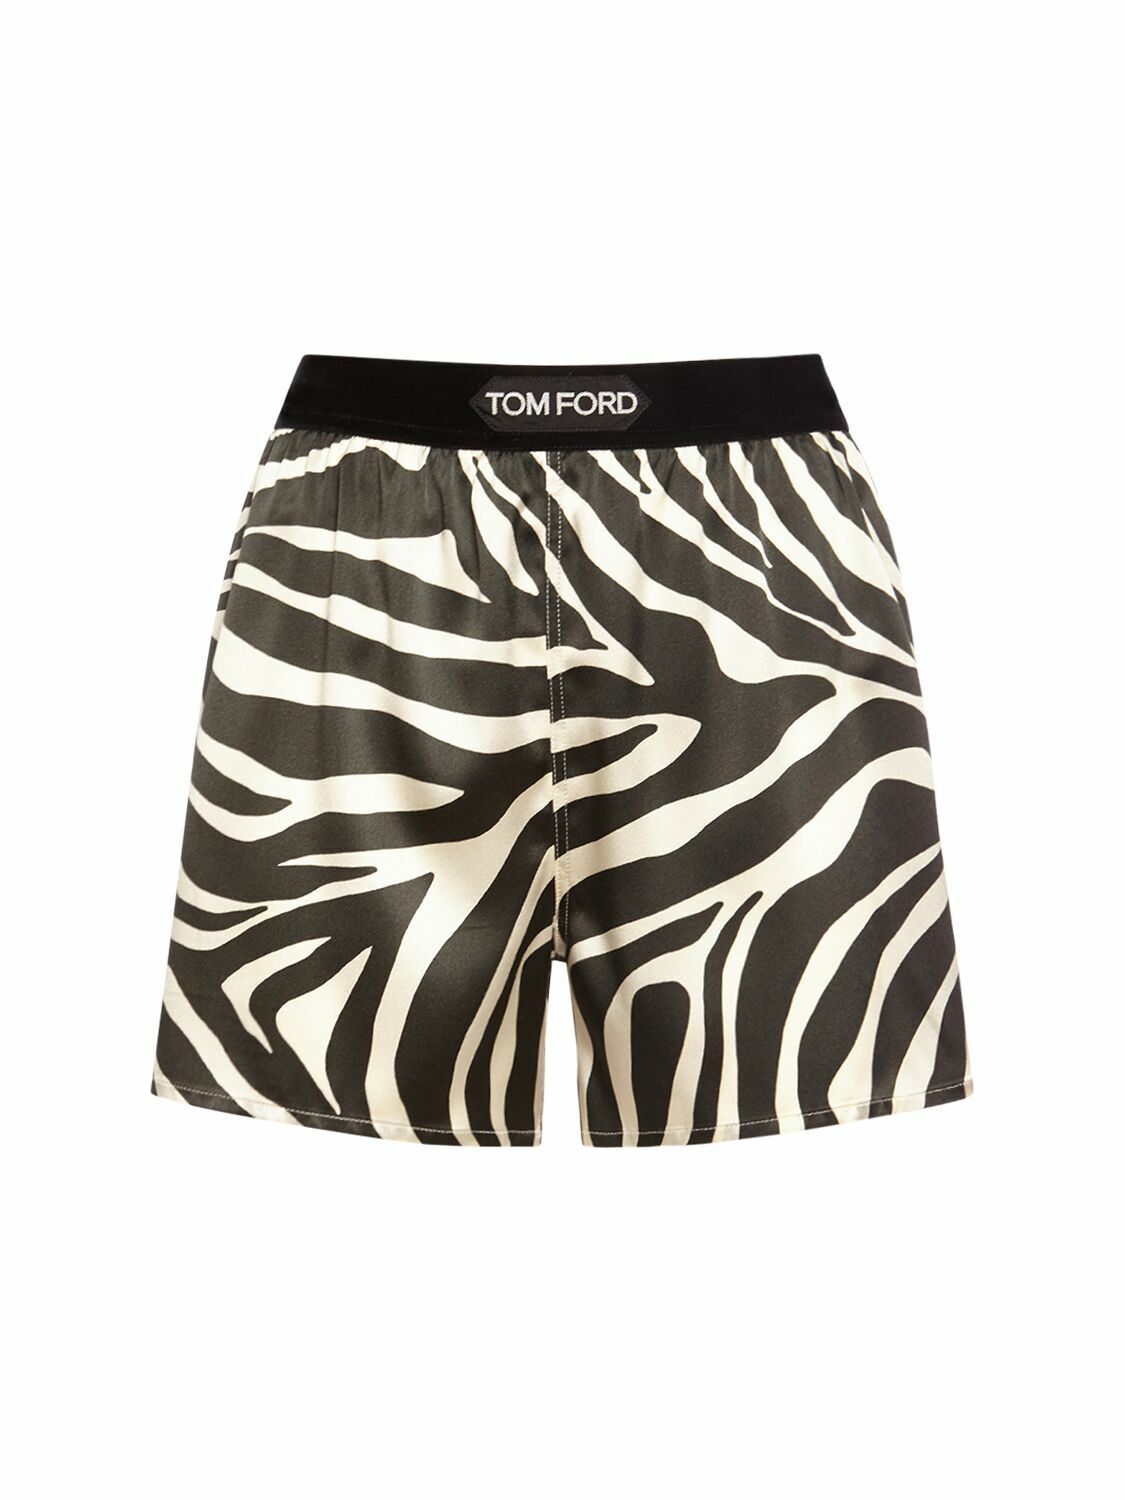 TOM FORD - Printed Silk Satin Boxers TOM FORD